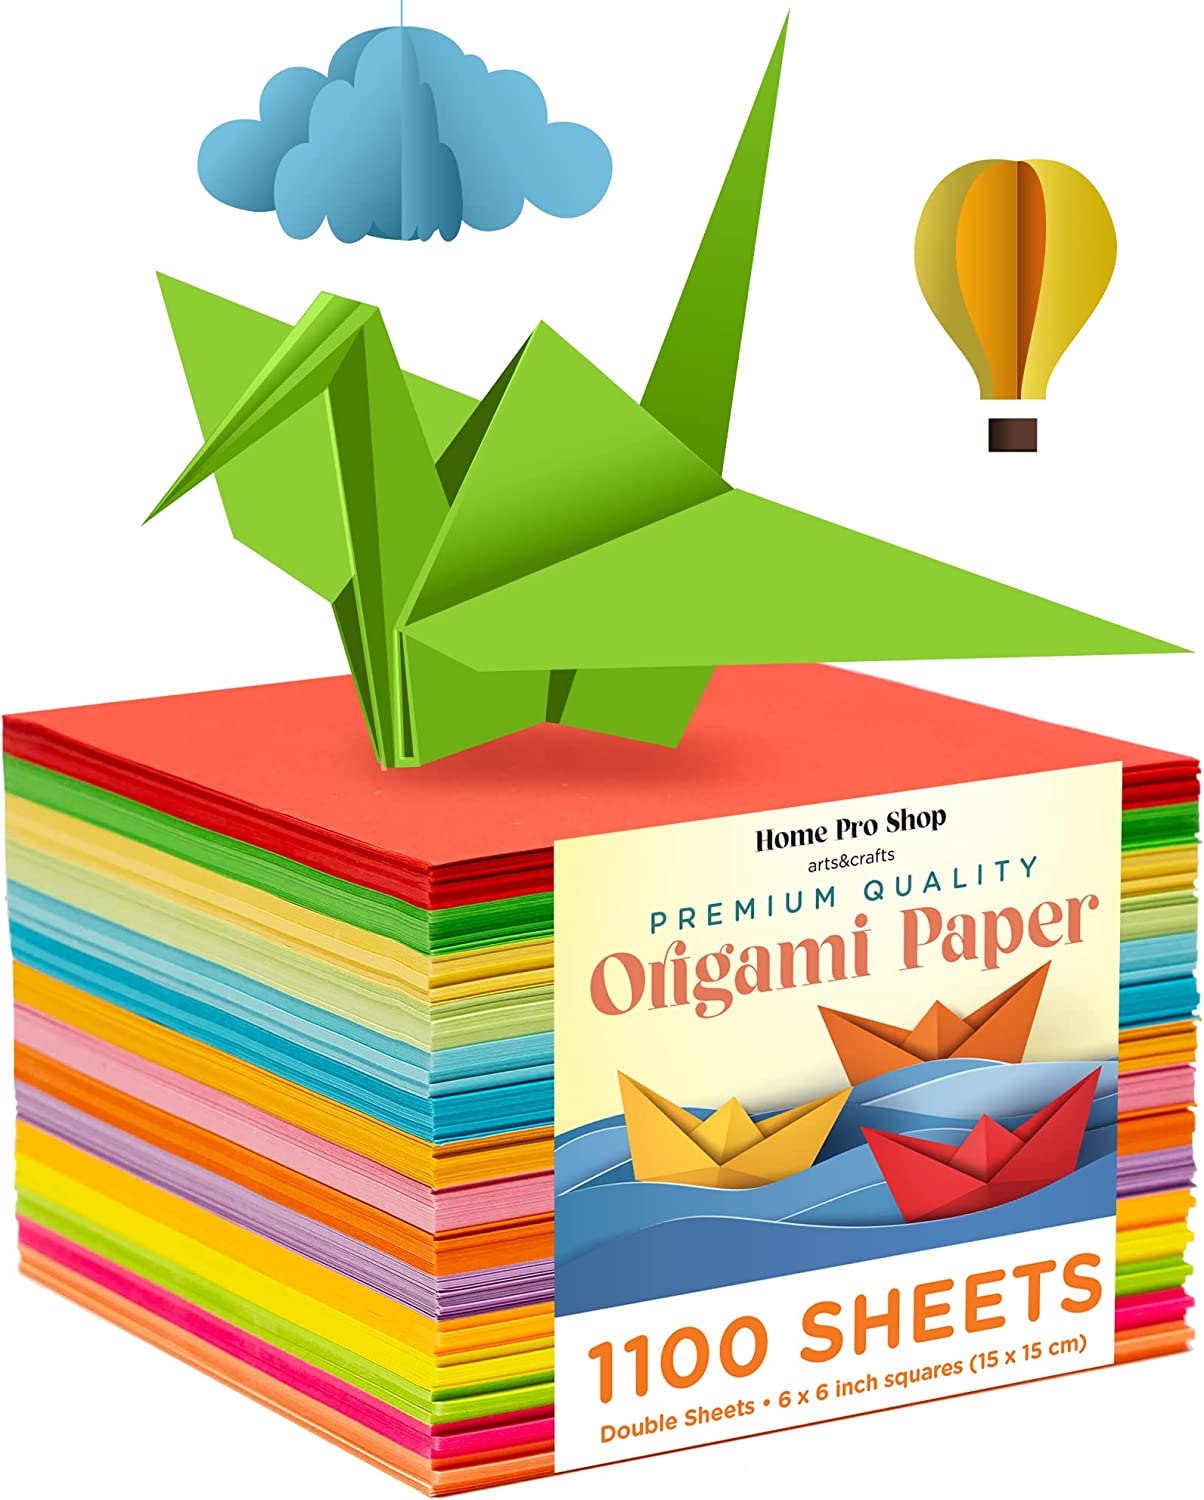 Japanese Washi Origami Paper 500 Sheets, 10 Vivid Colors and Easy Folding,6  Inch Square Sheet, for Kids Adults, Papers, Arts and Crafts Projects  (E-Book Included) 